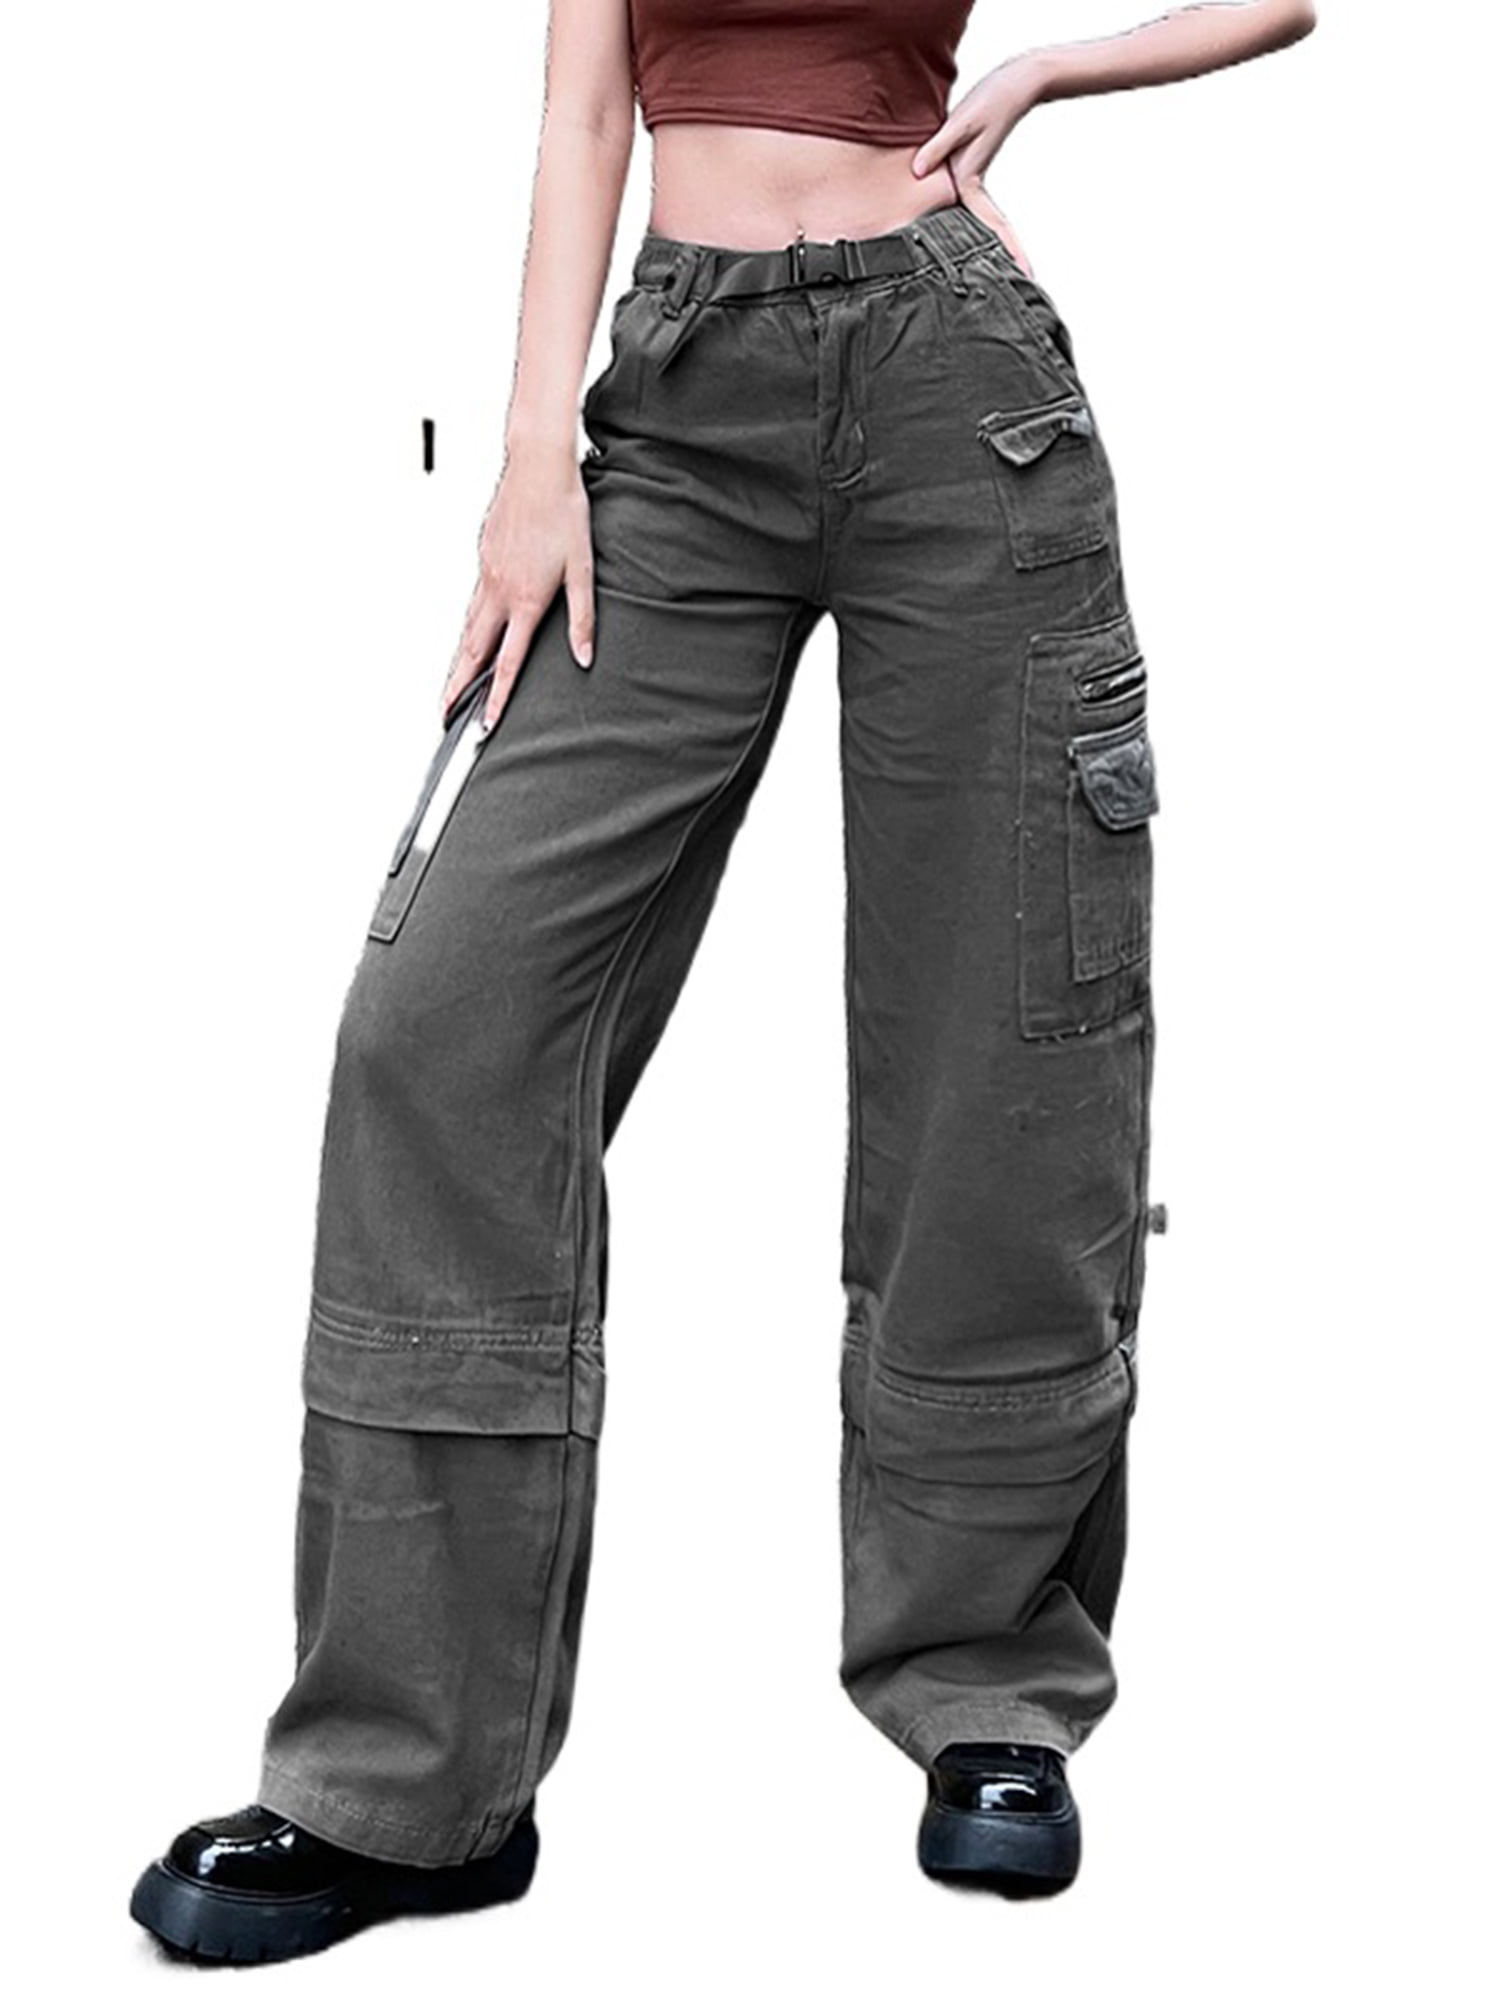 Kayotuas Women's High Waist Baggy Jeans Flap Pocket Side Relaxed Fit ...